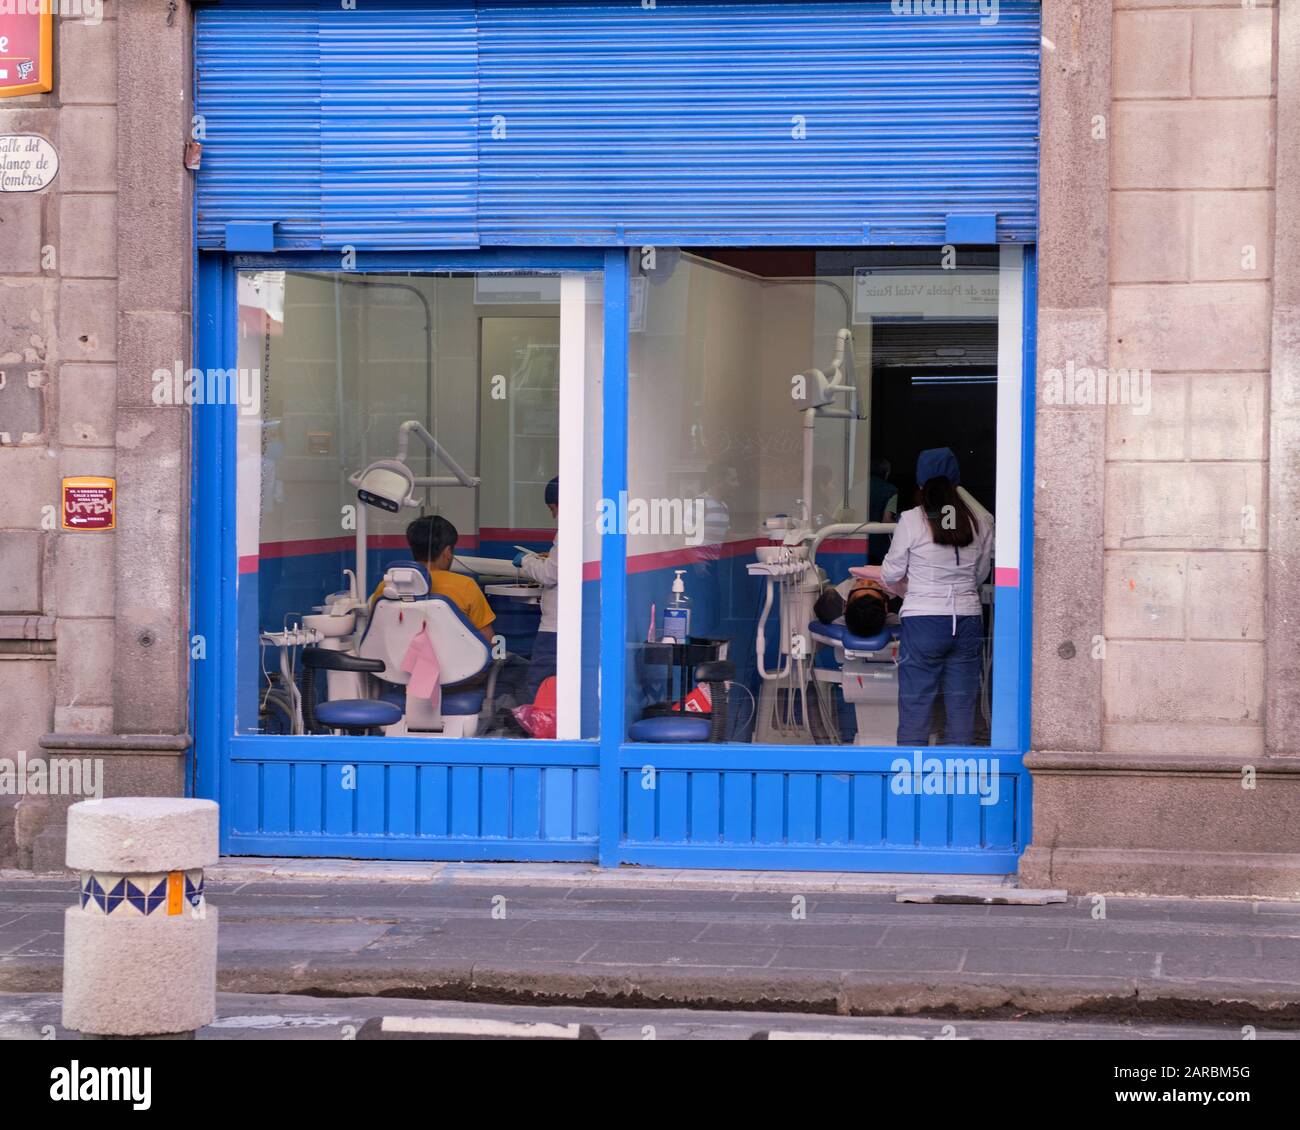 Dental office, with windows giving onto the streets where passerby can view the dentist at work on a patient in chair. Puebla, Mexico Stock Photo